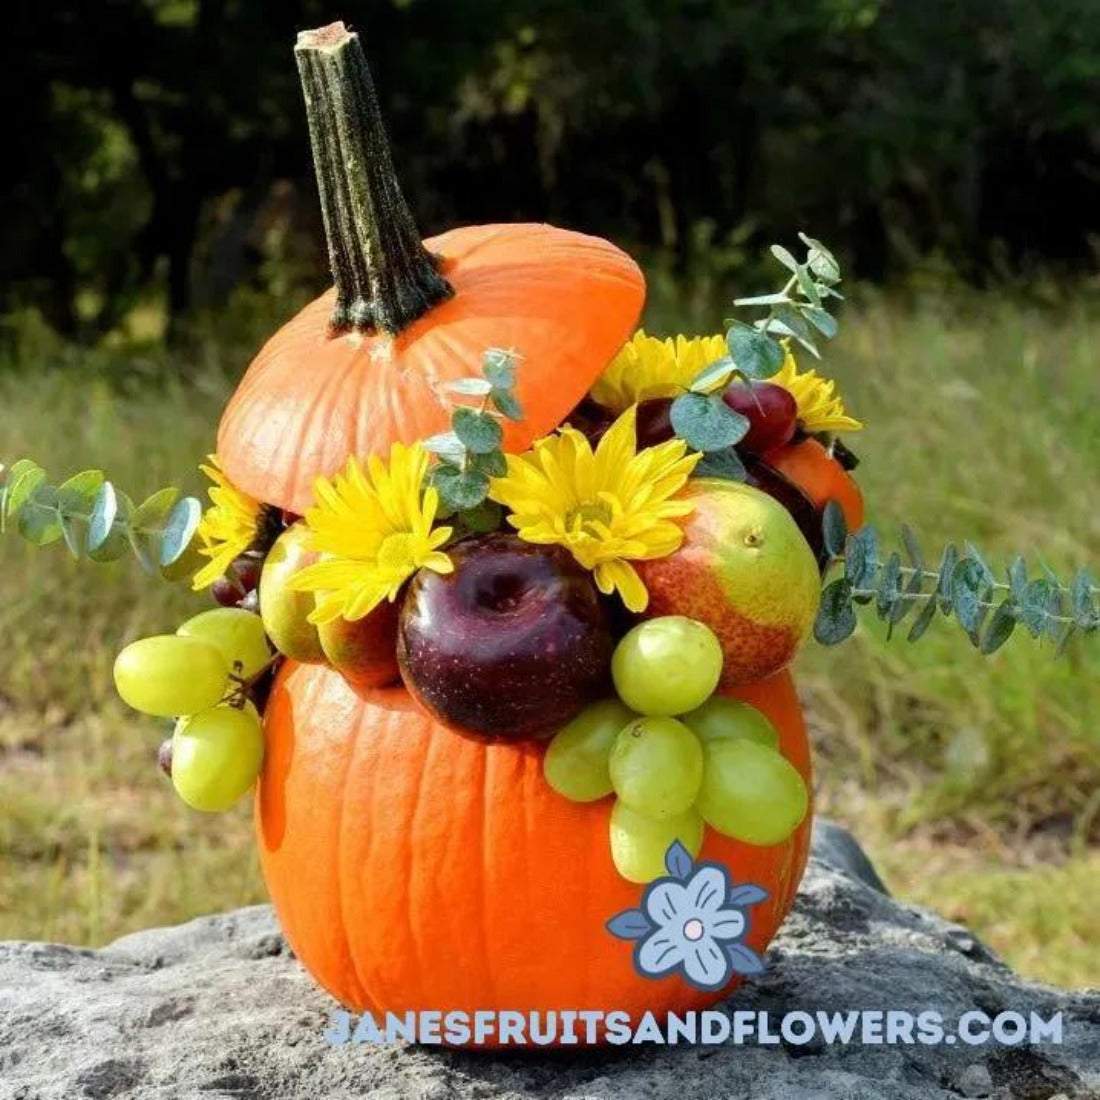 Pumpkin composition - Jane's Fruits And Flowers